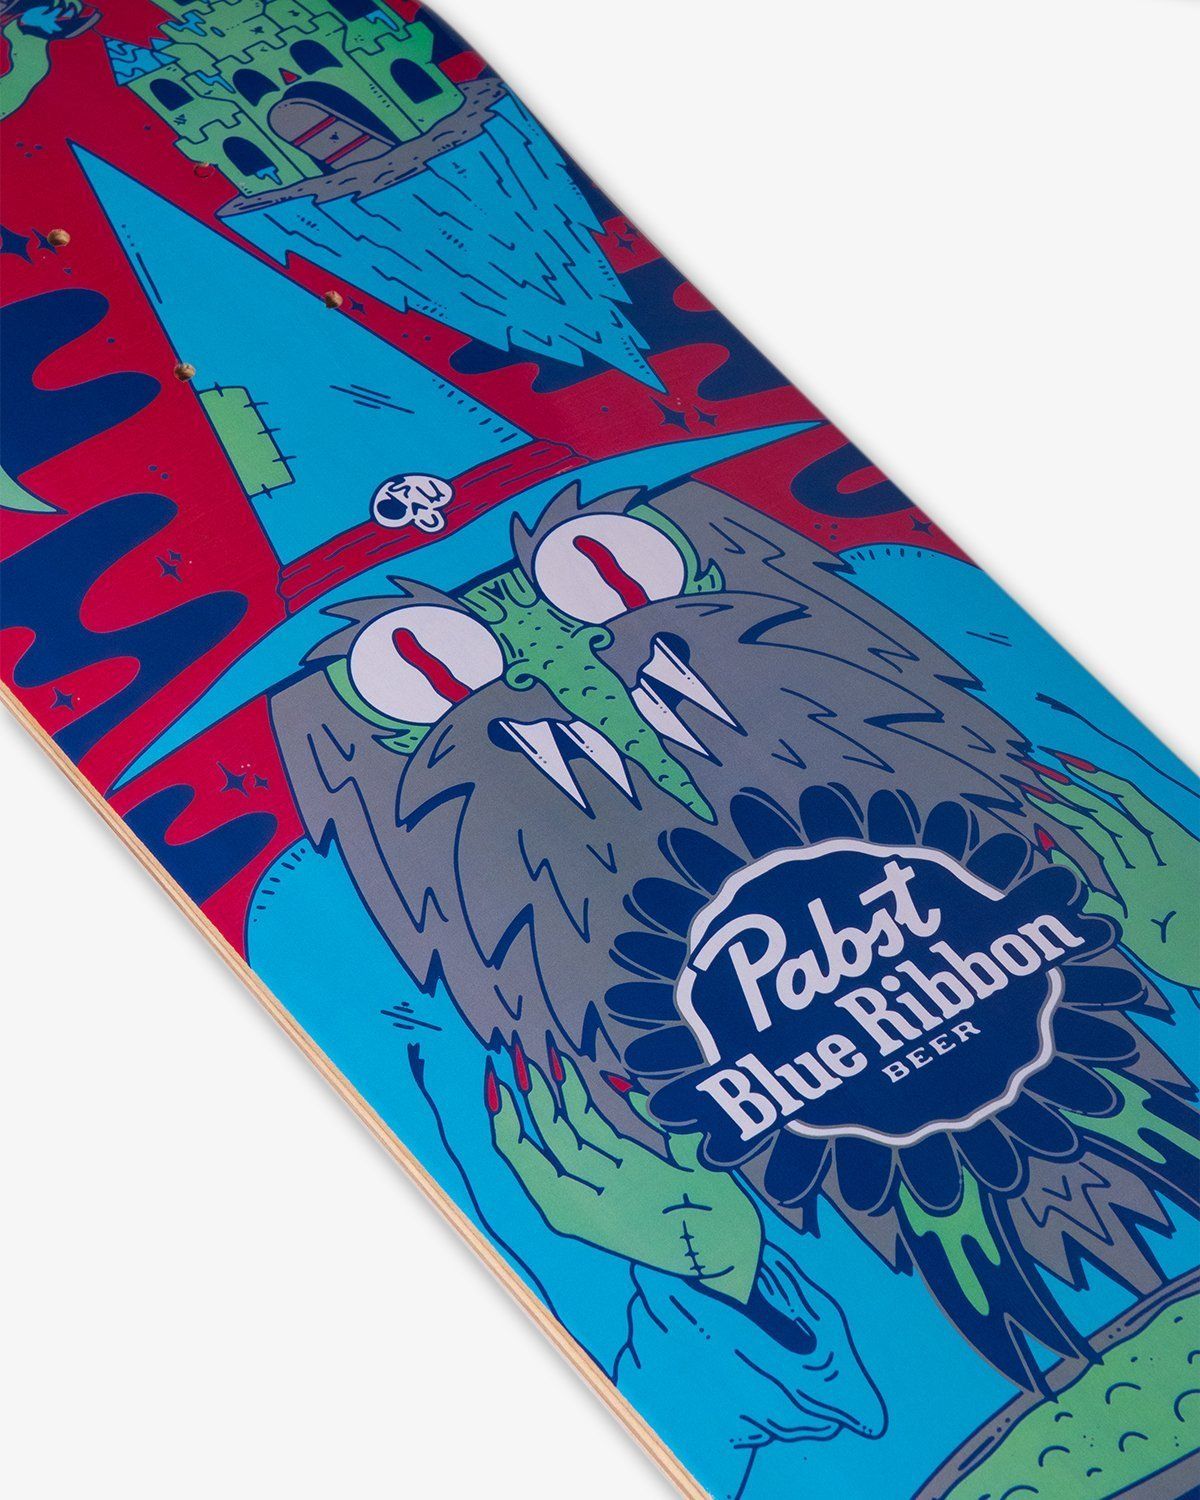 Ride With The Wizard Skateboard By Dakota Cates For Pabst Blue Ribbon 2